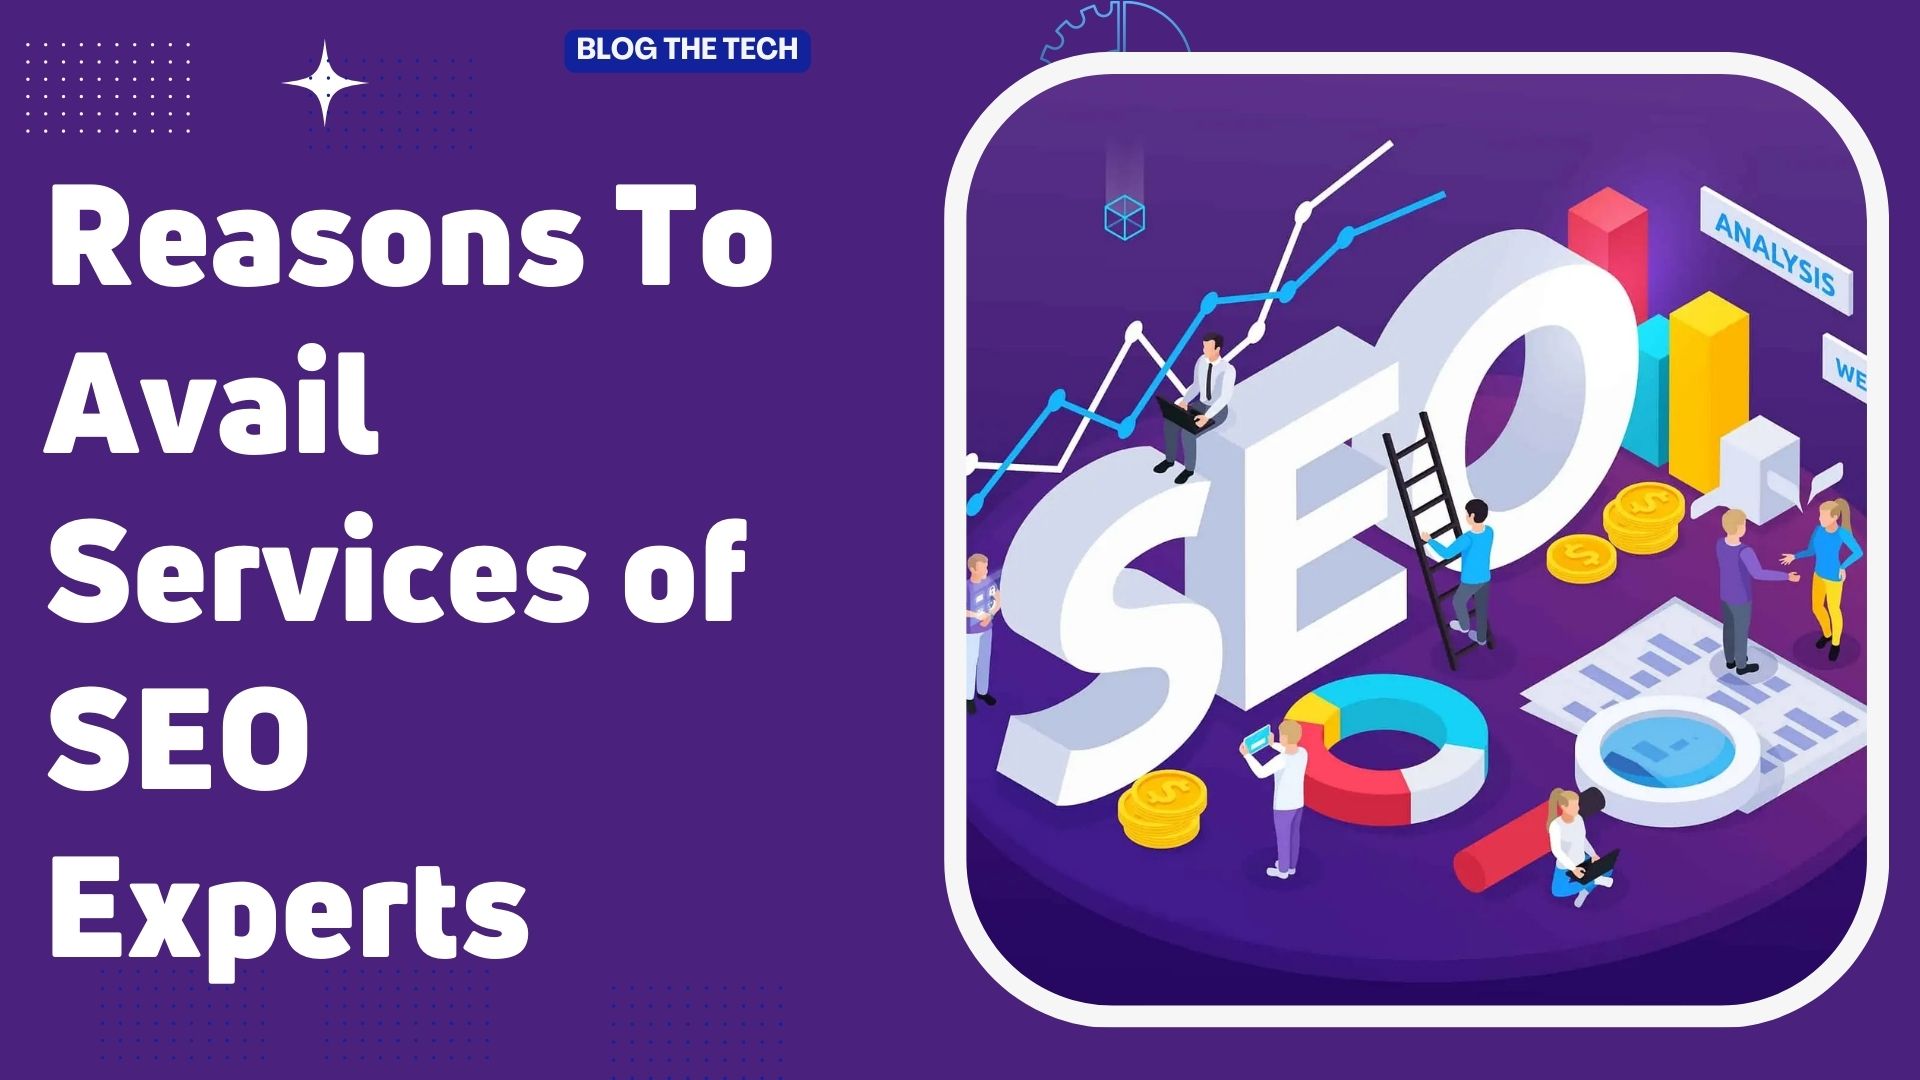 Reasons To Avail Services of SEO Experts